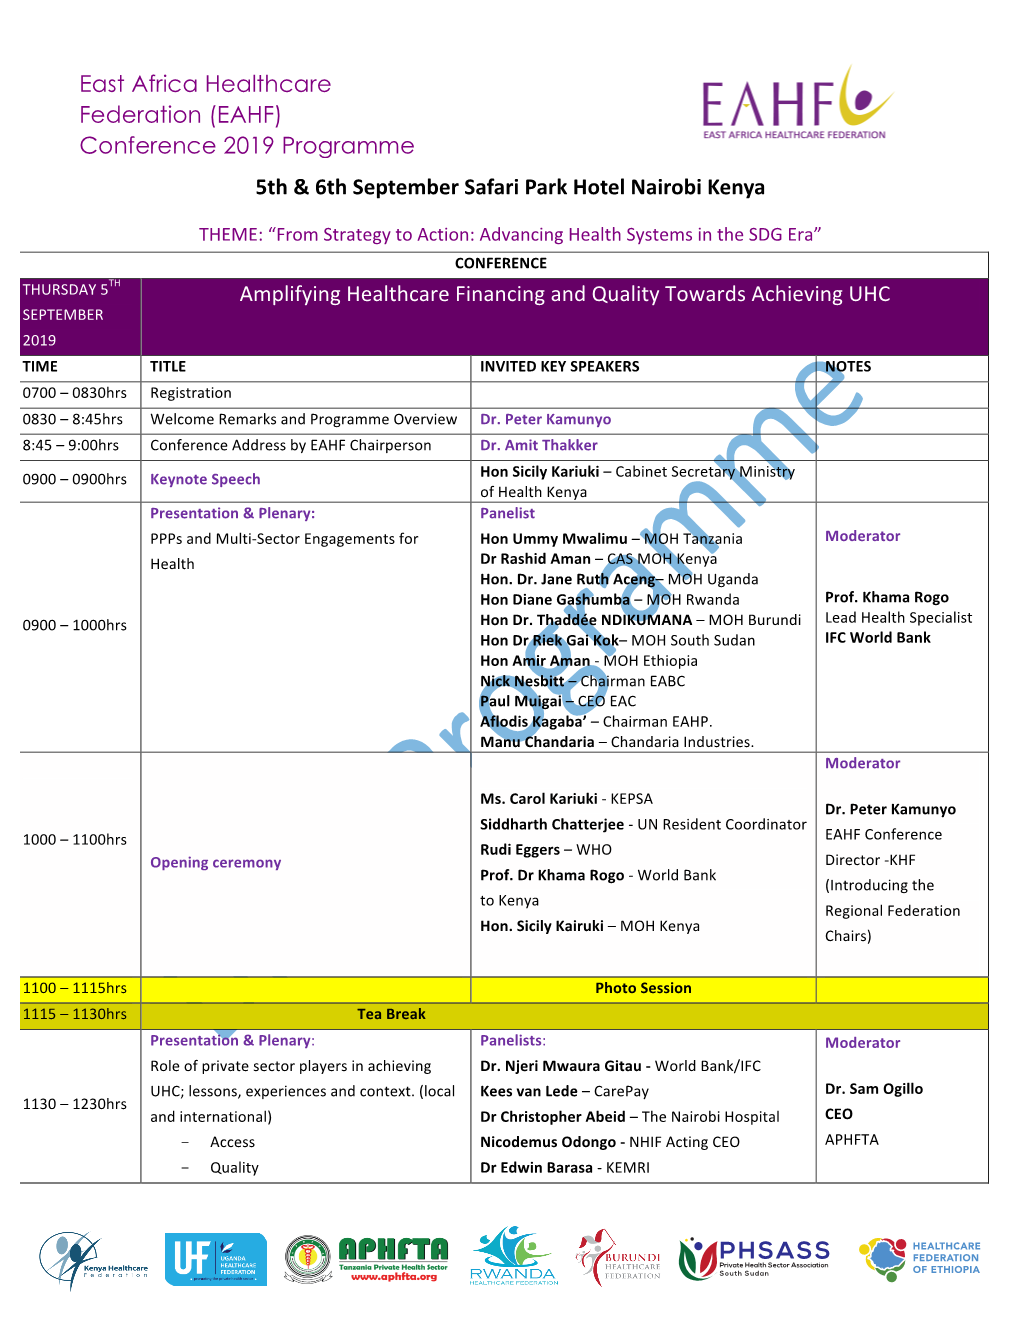 East Africa Healthcare Federation (EAHF) Conference 2019 Programme